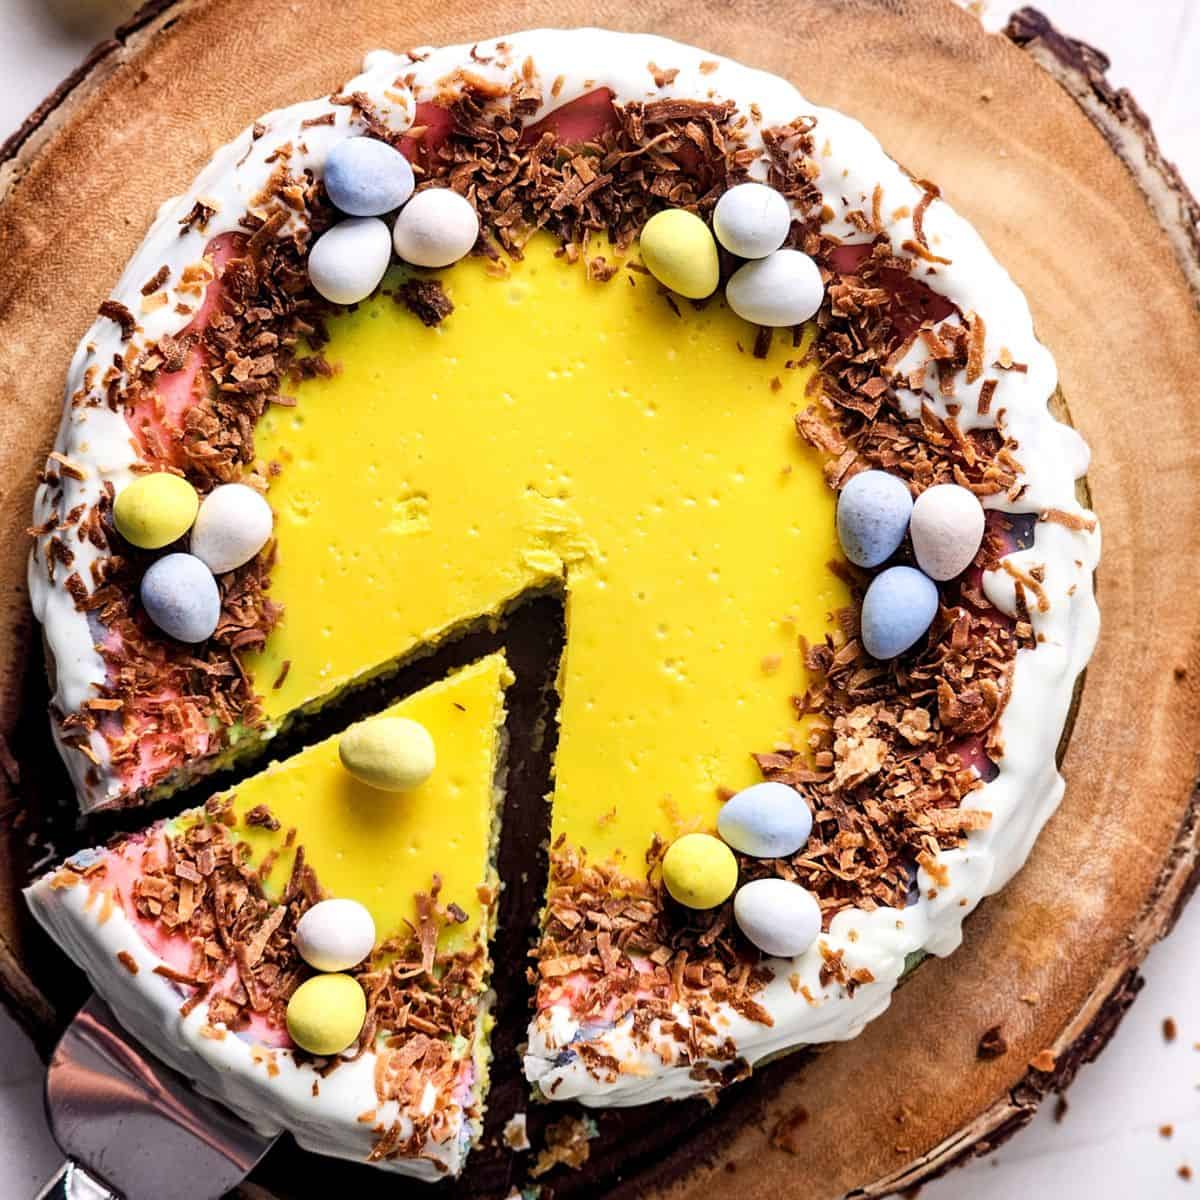 An easter cheesecake with robins eggs on top with a slice cut from the cake.